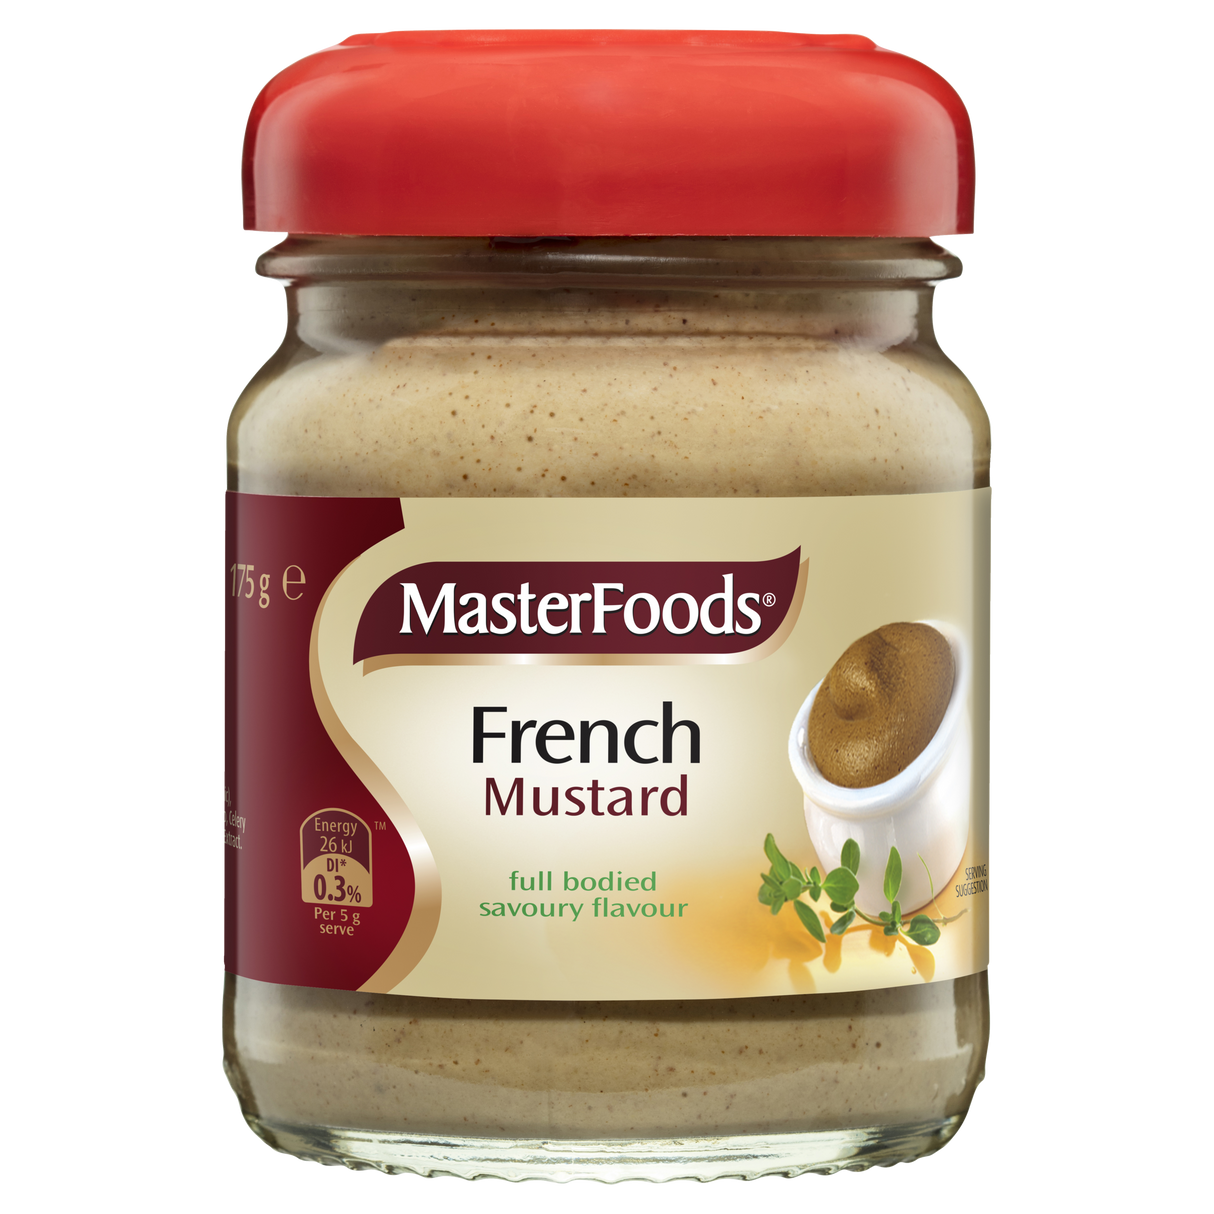 MasterFoods French Mustard 175g